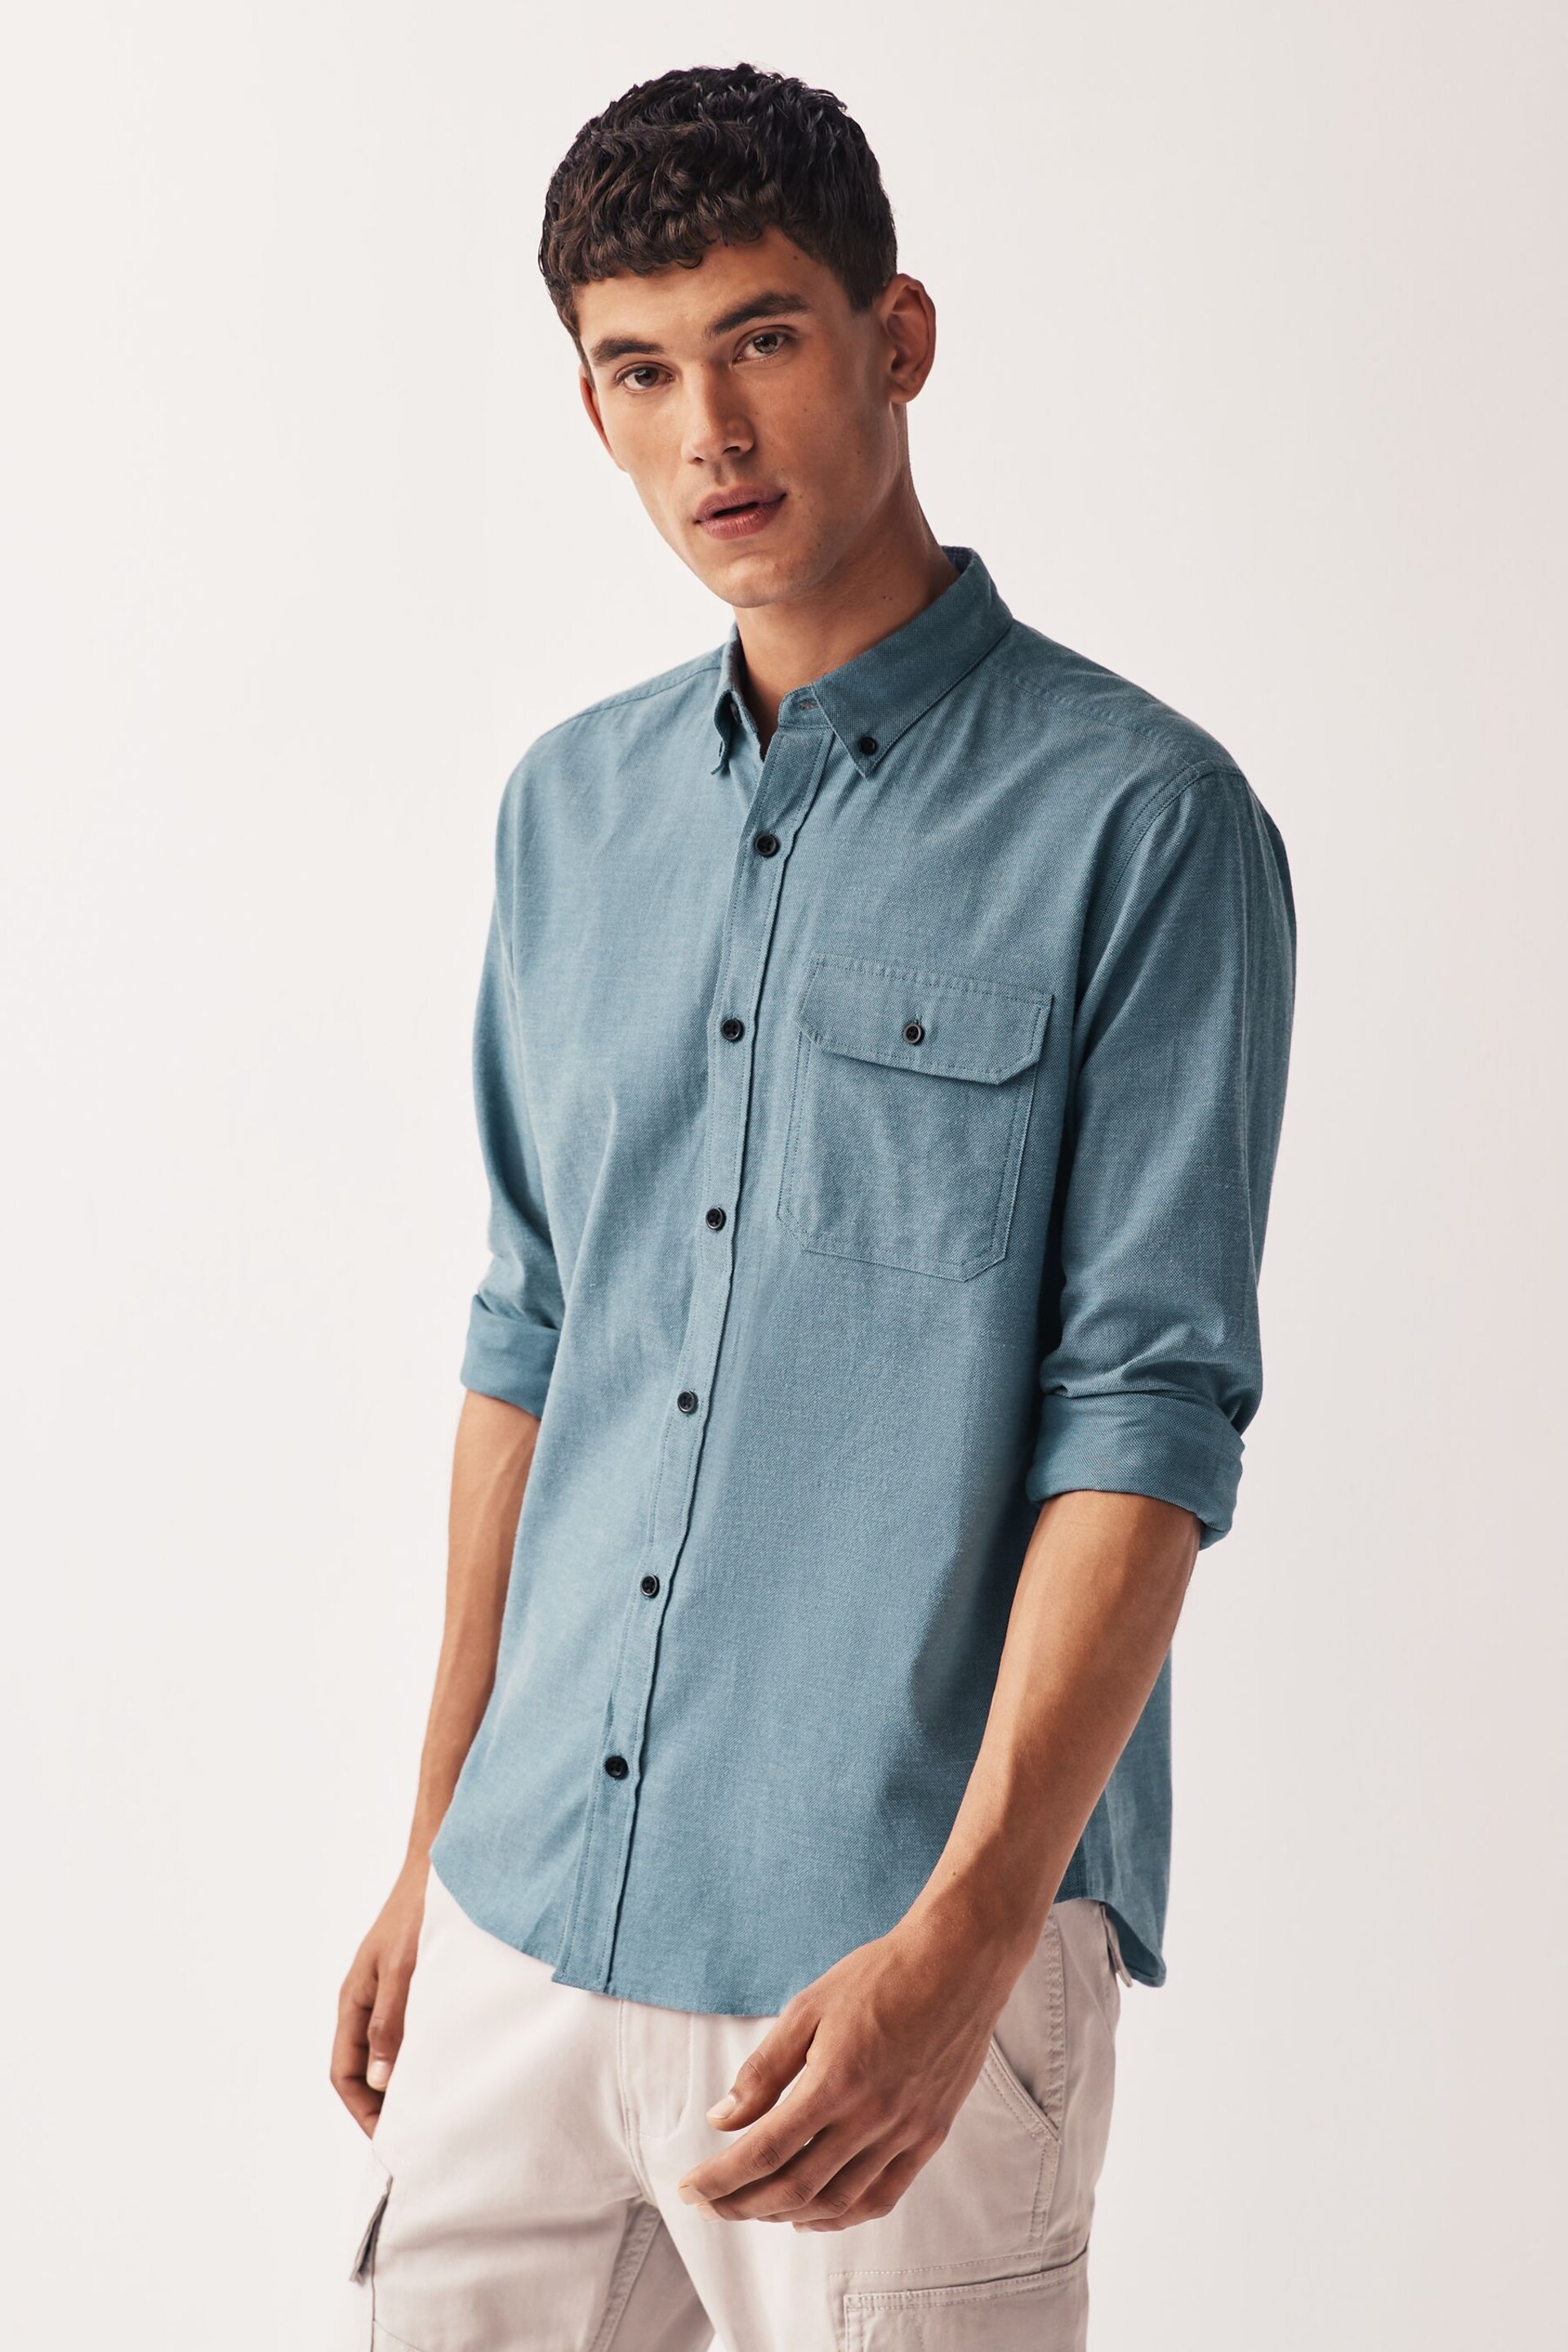 Blue Textured Oxford Long Sleeve Shirt - Image 1 of 9